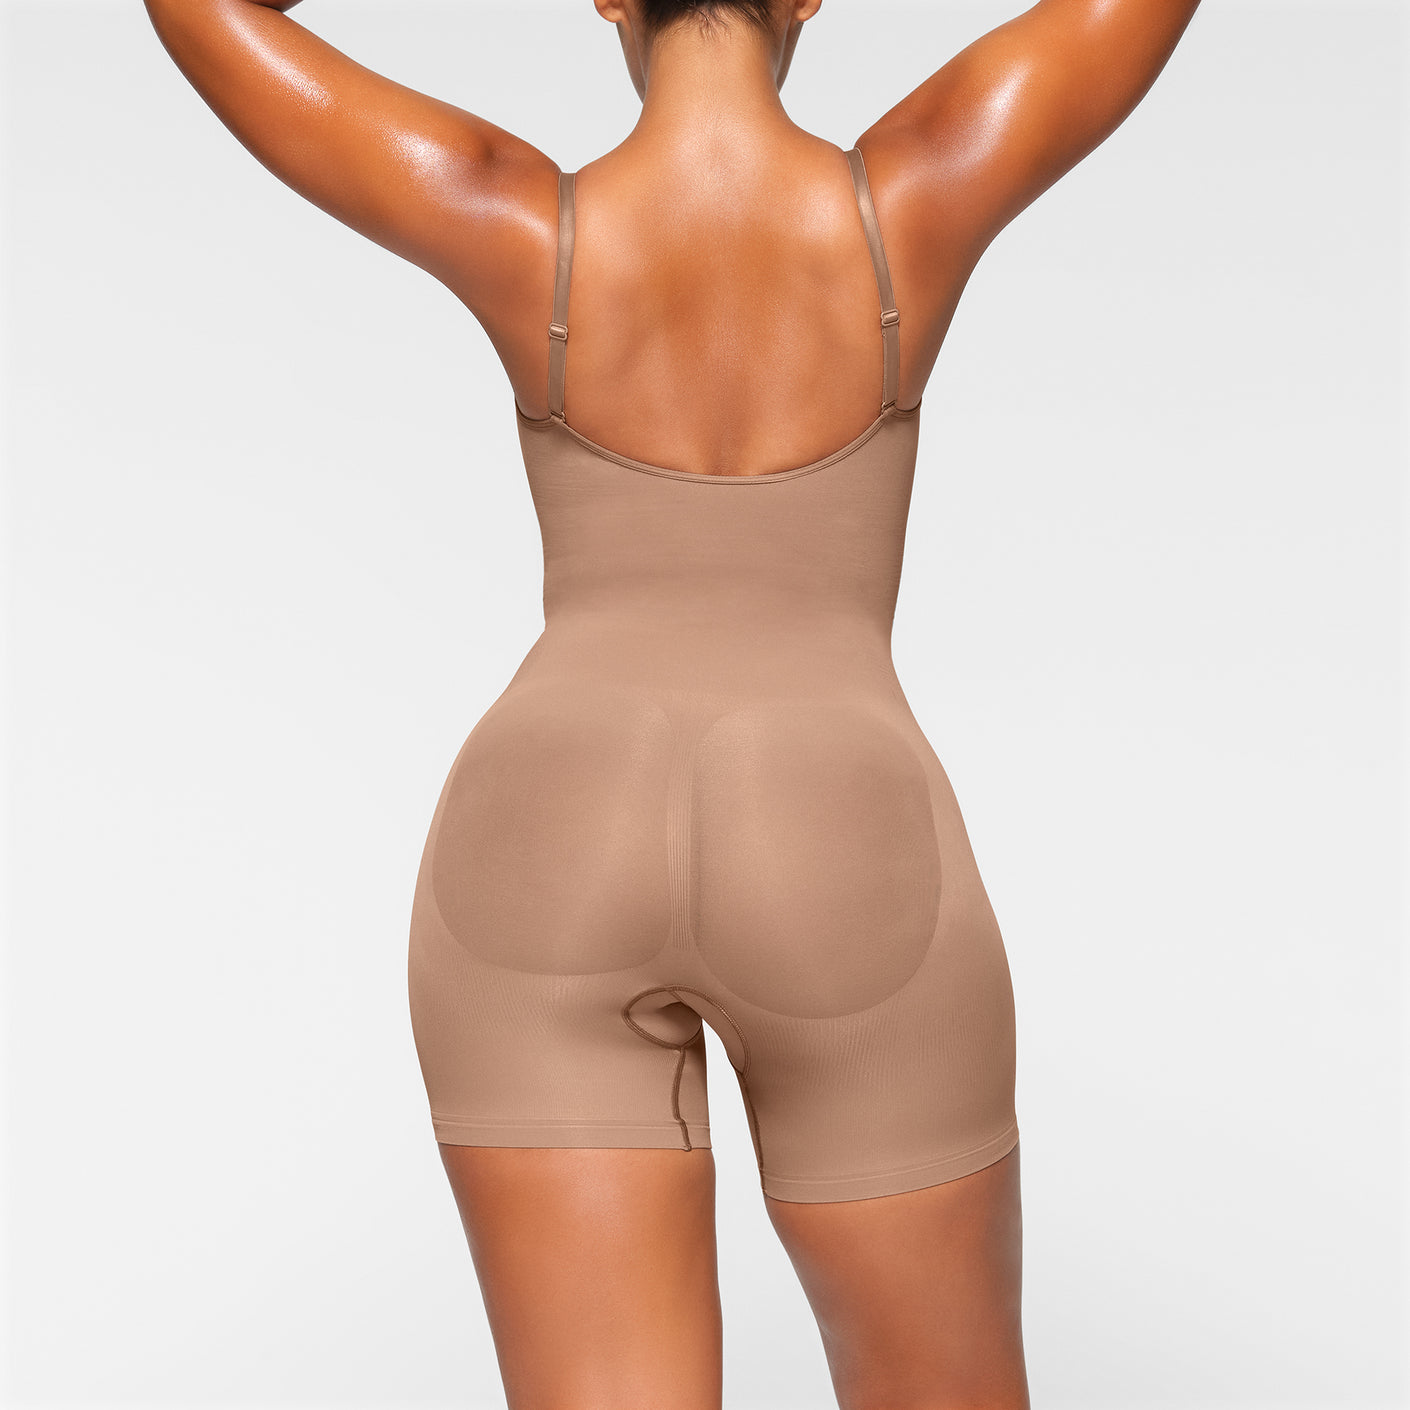 Is the viral Skims mid thigh shapewear bodysuit worth the cost, or